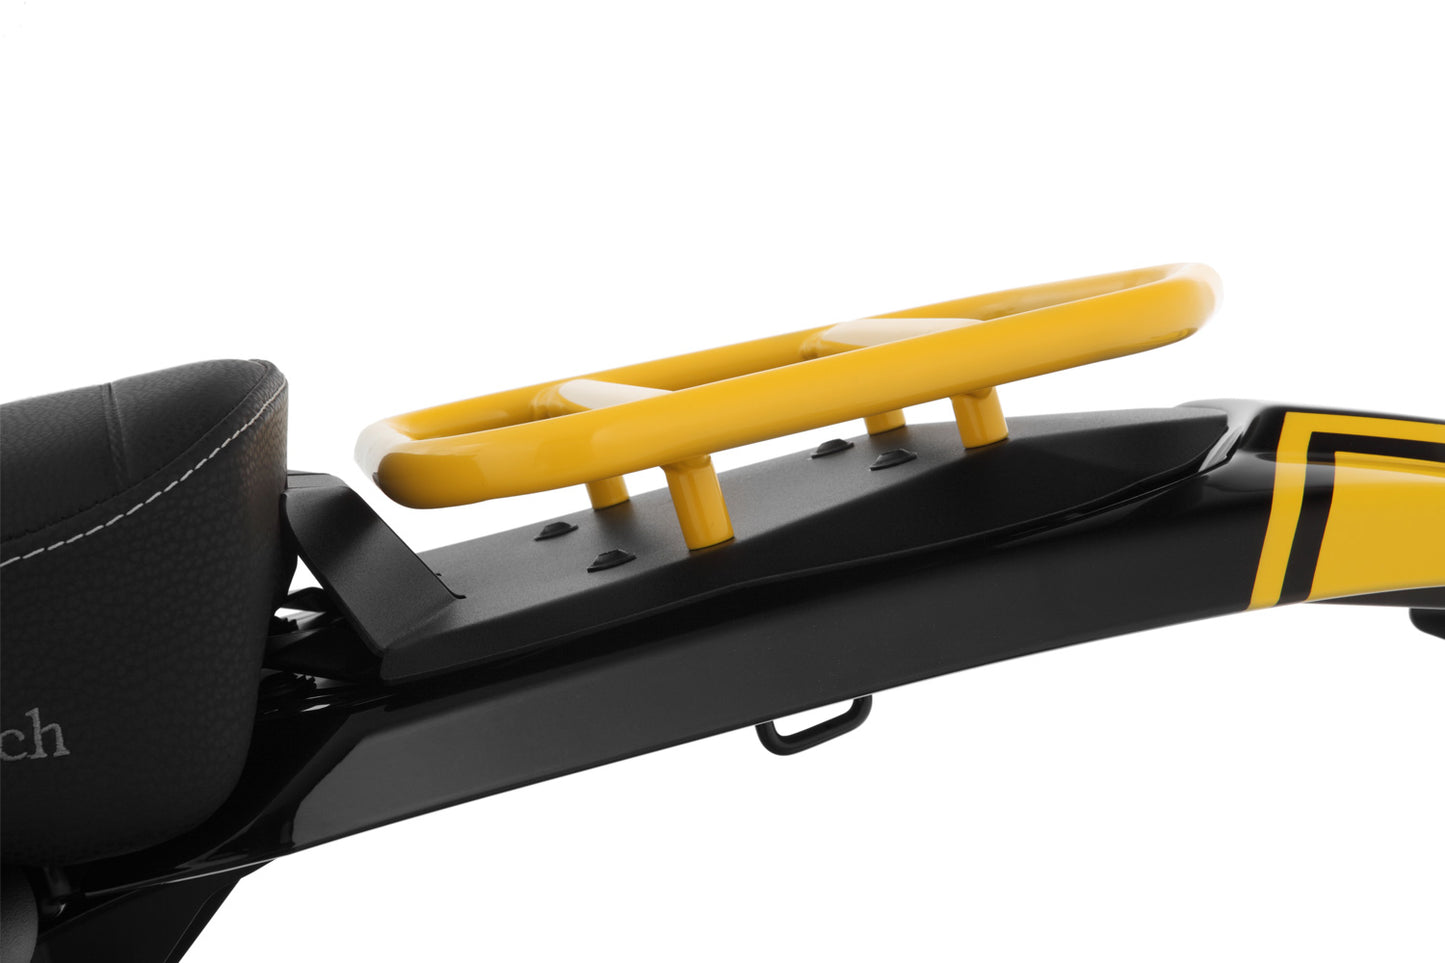 Wunderlich pillion luggage rack “Rallye” - without passenger frame - yellow | Edition 40 Years GS